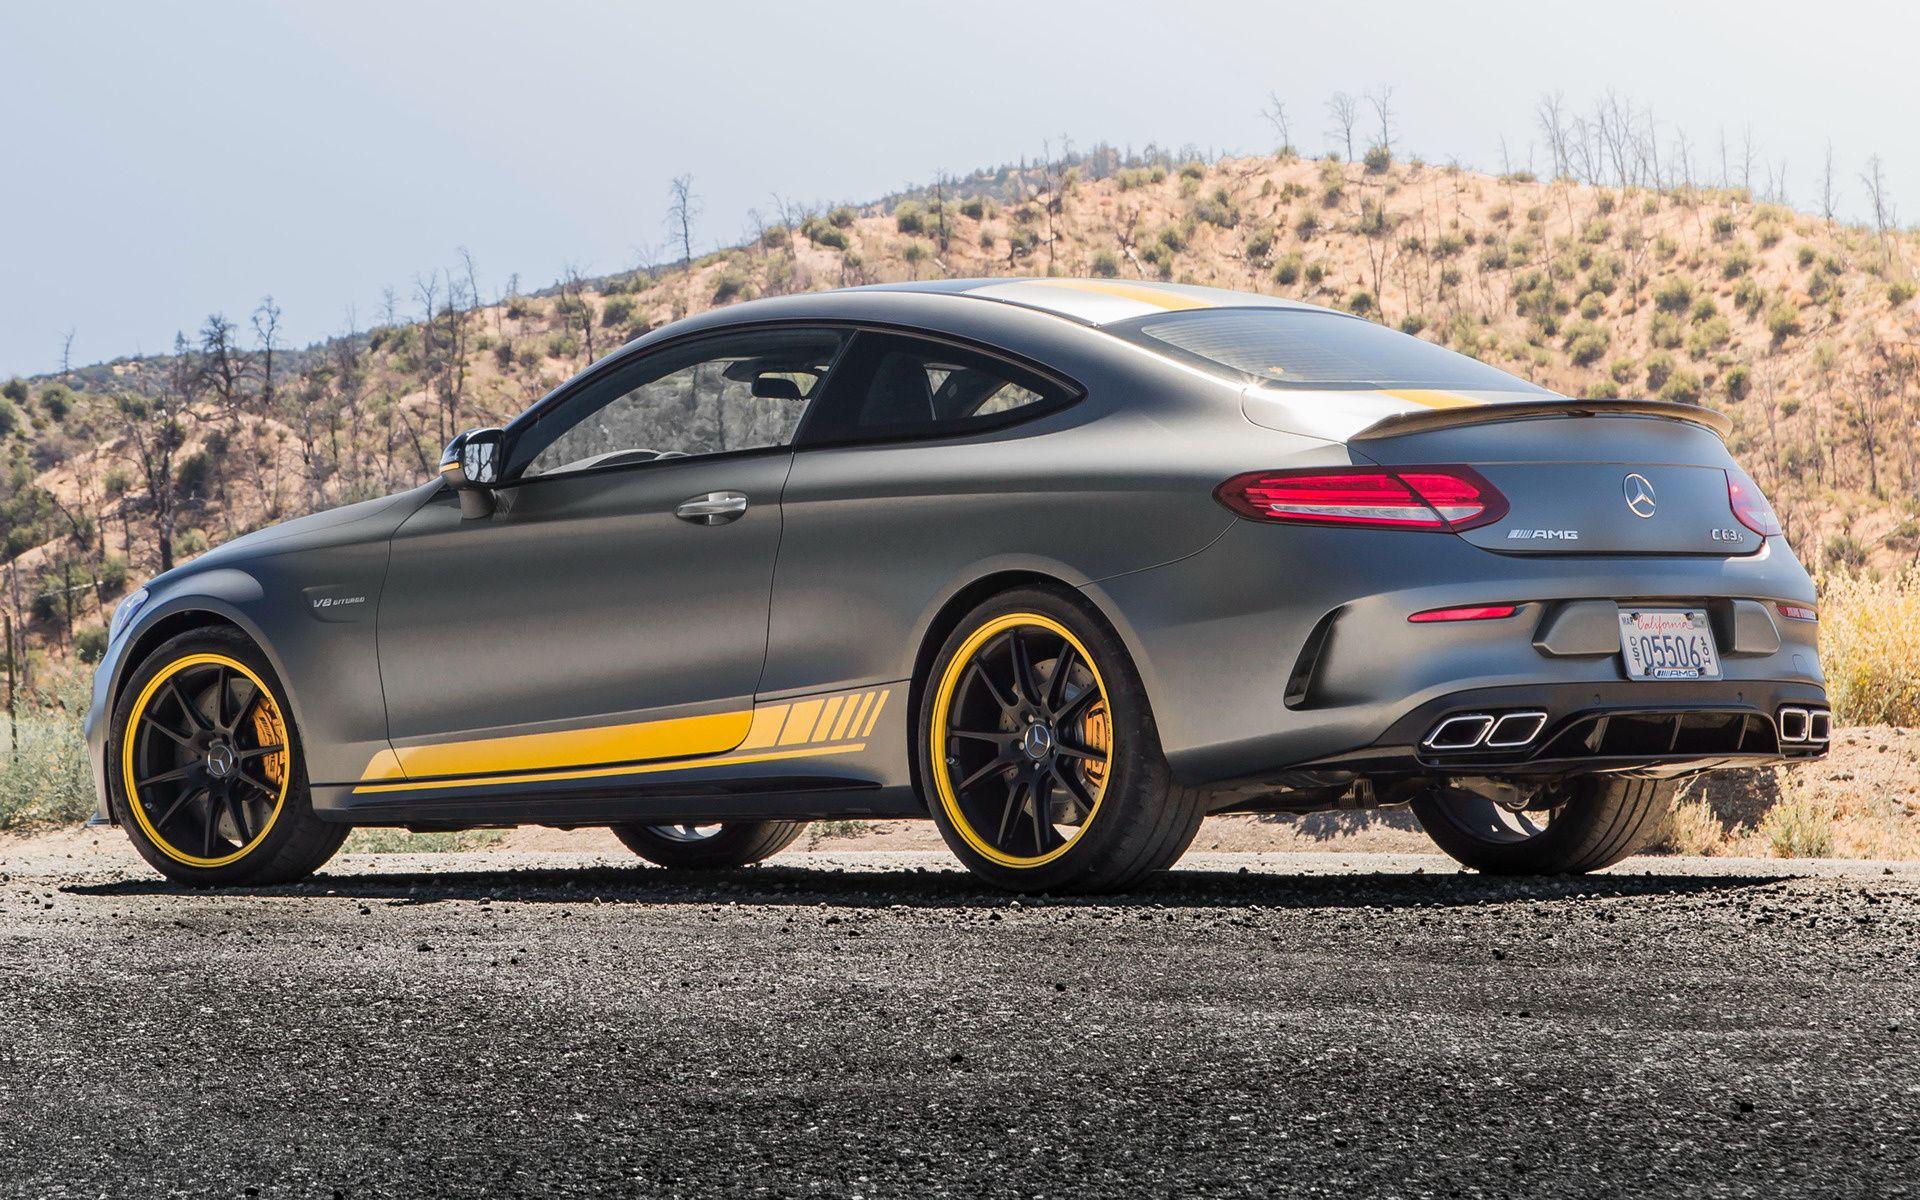 Mercedes AMG C 63 S Coupe Edition 1 (2017) US Wallpaper And HD